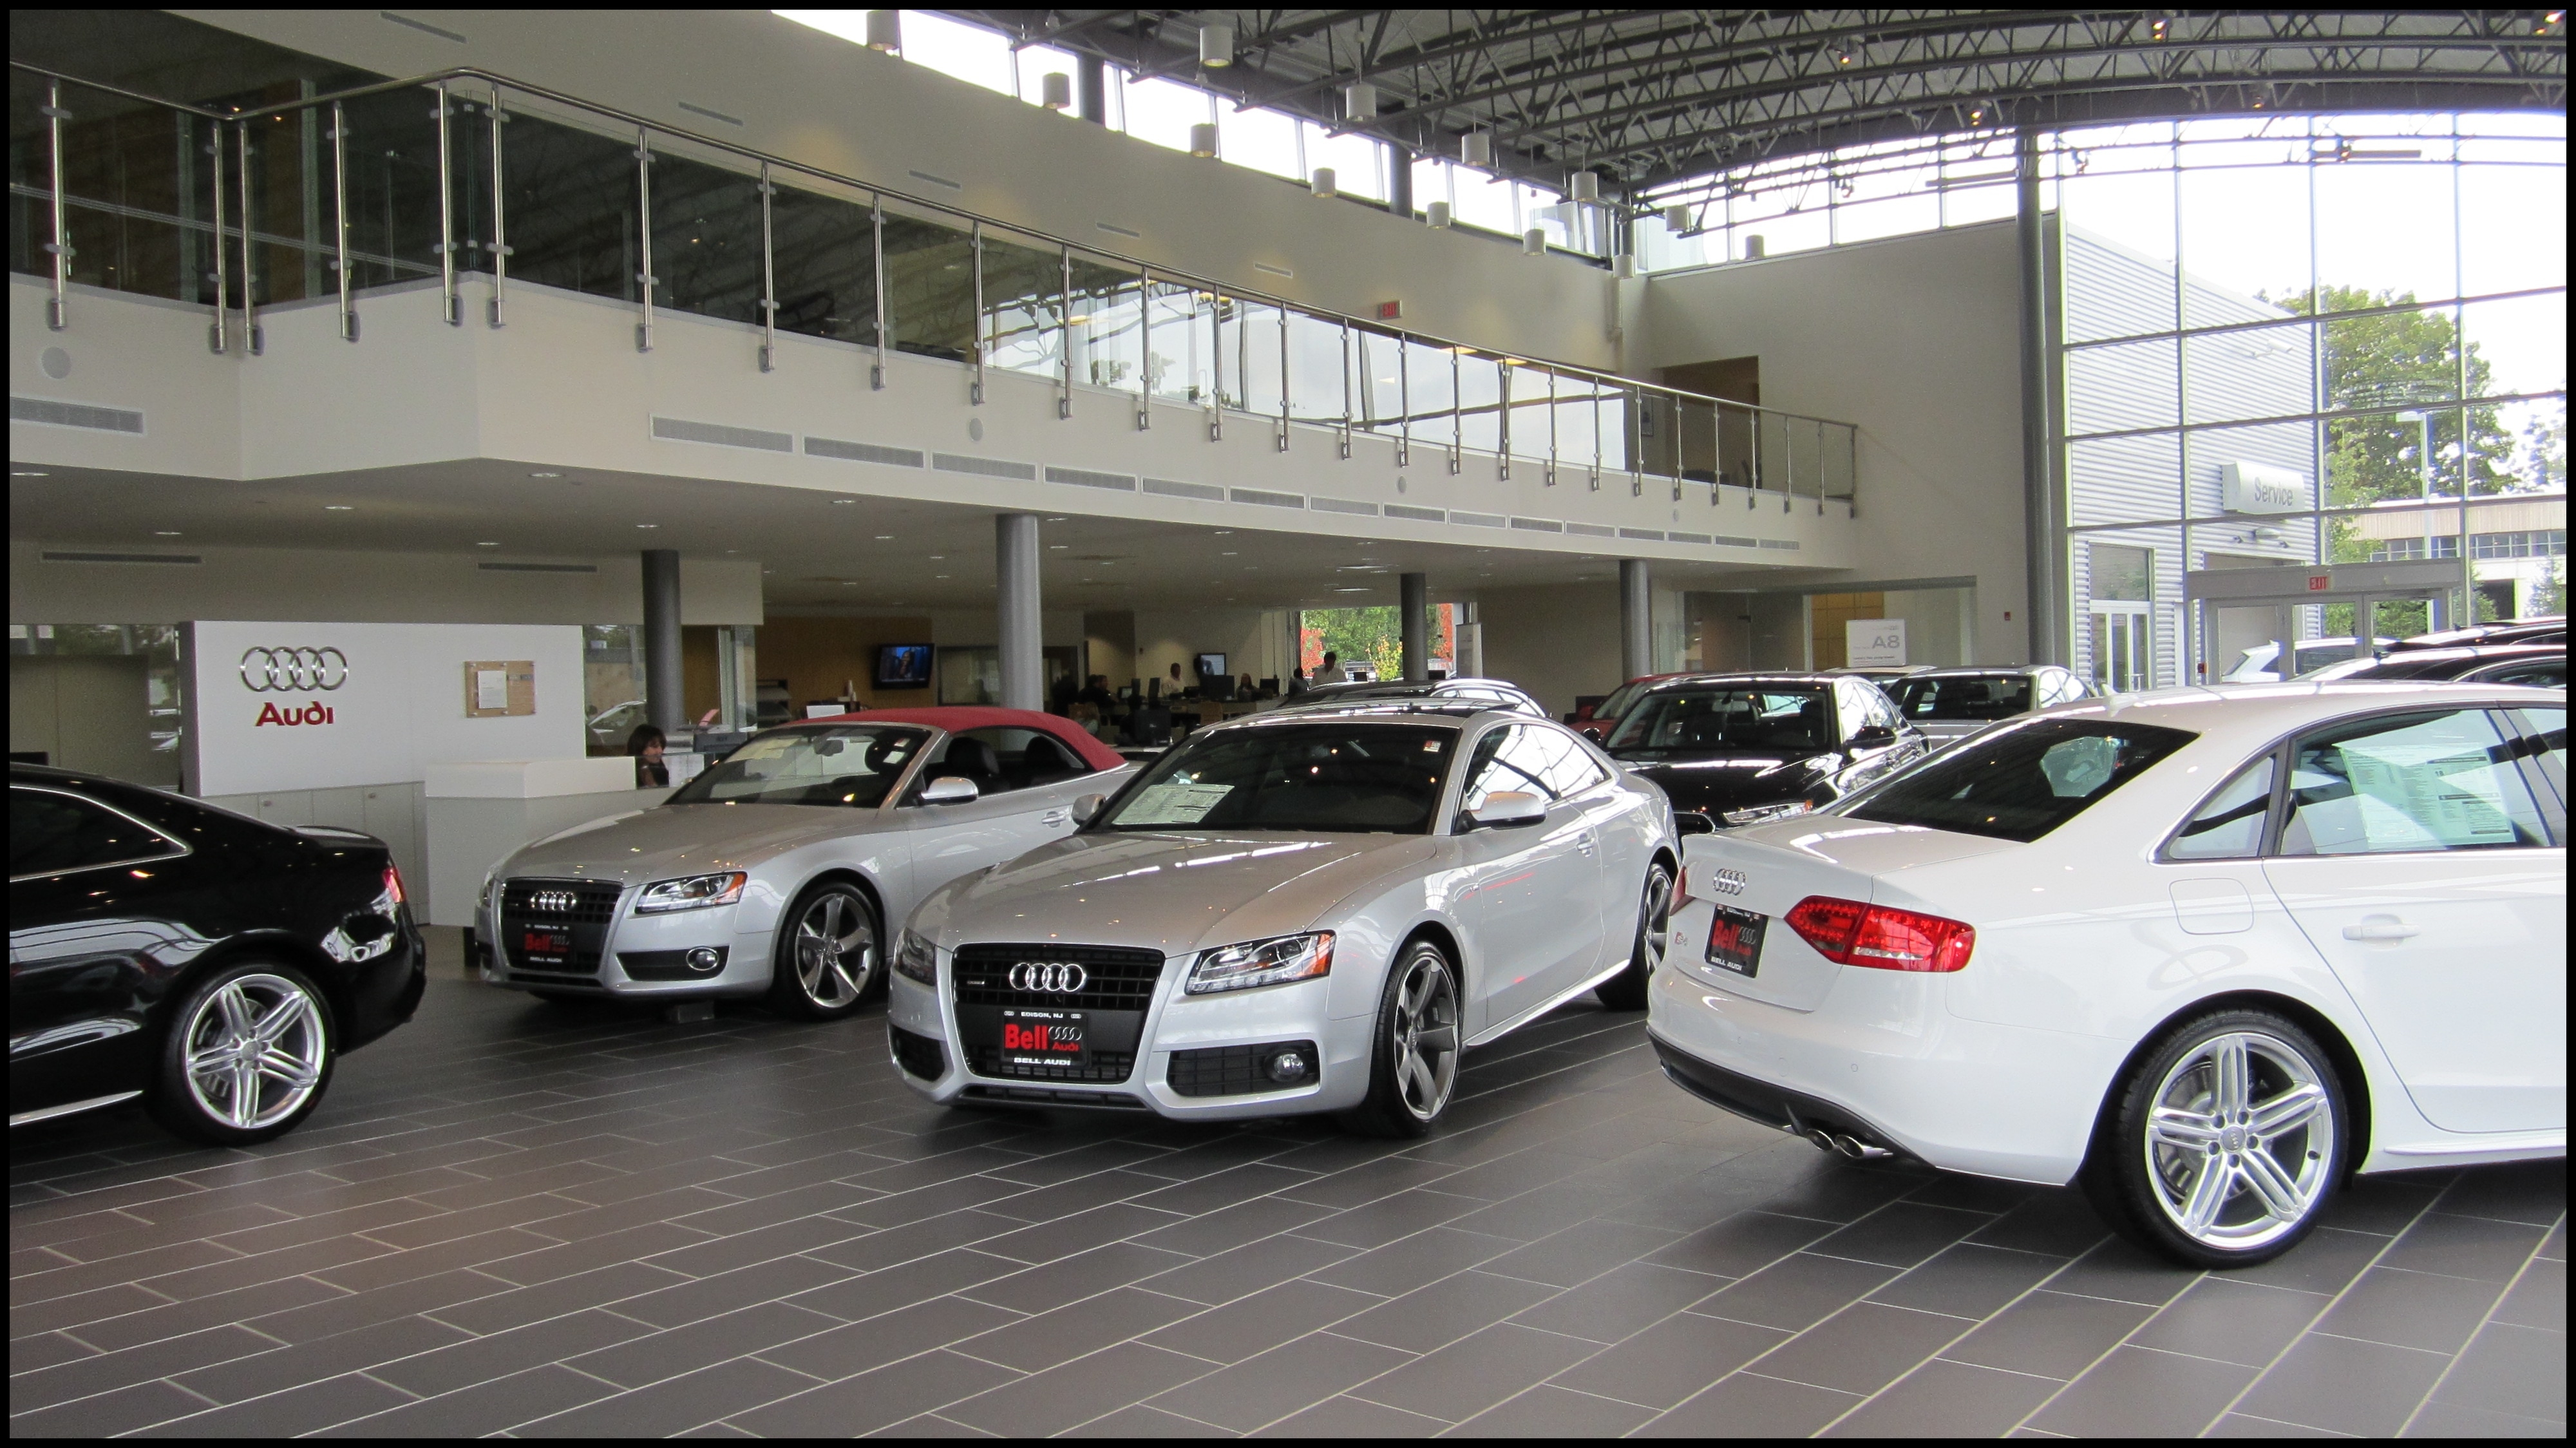 Bell Audi earns top Magna Society Elite honors from Audi for top performance in record breaking 2011